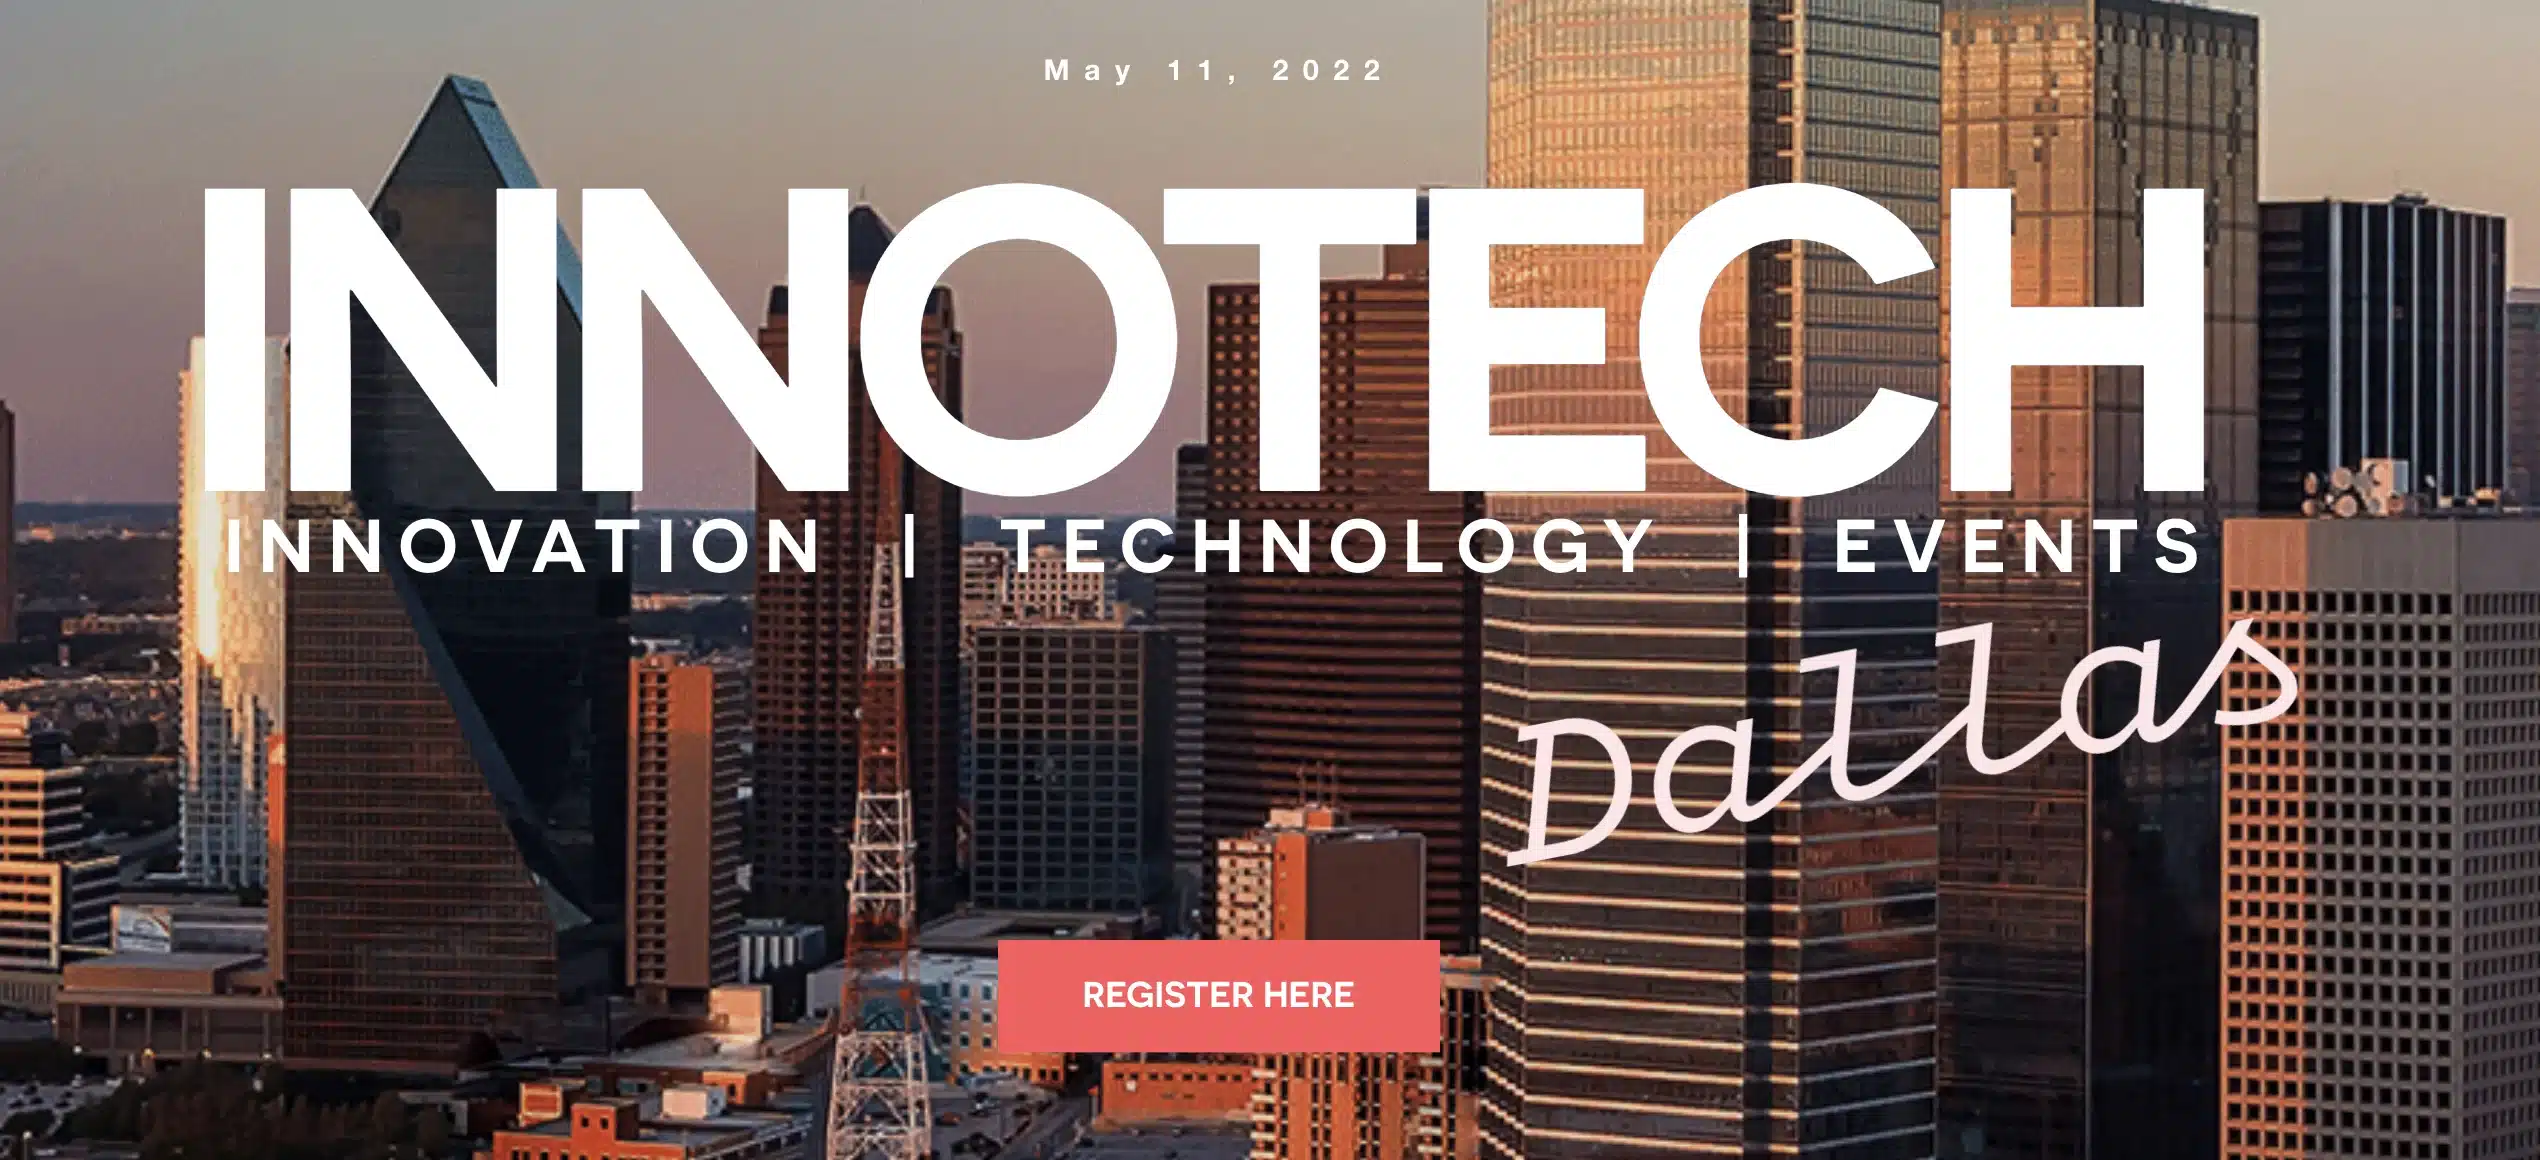 InnoTech Dallas Hosts Innovation and Technology Events in Dallas. Meet the Chronosphere at InnoTech Dallas.